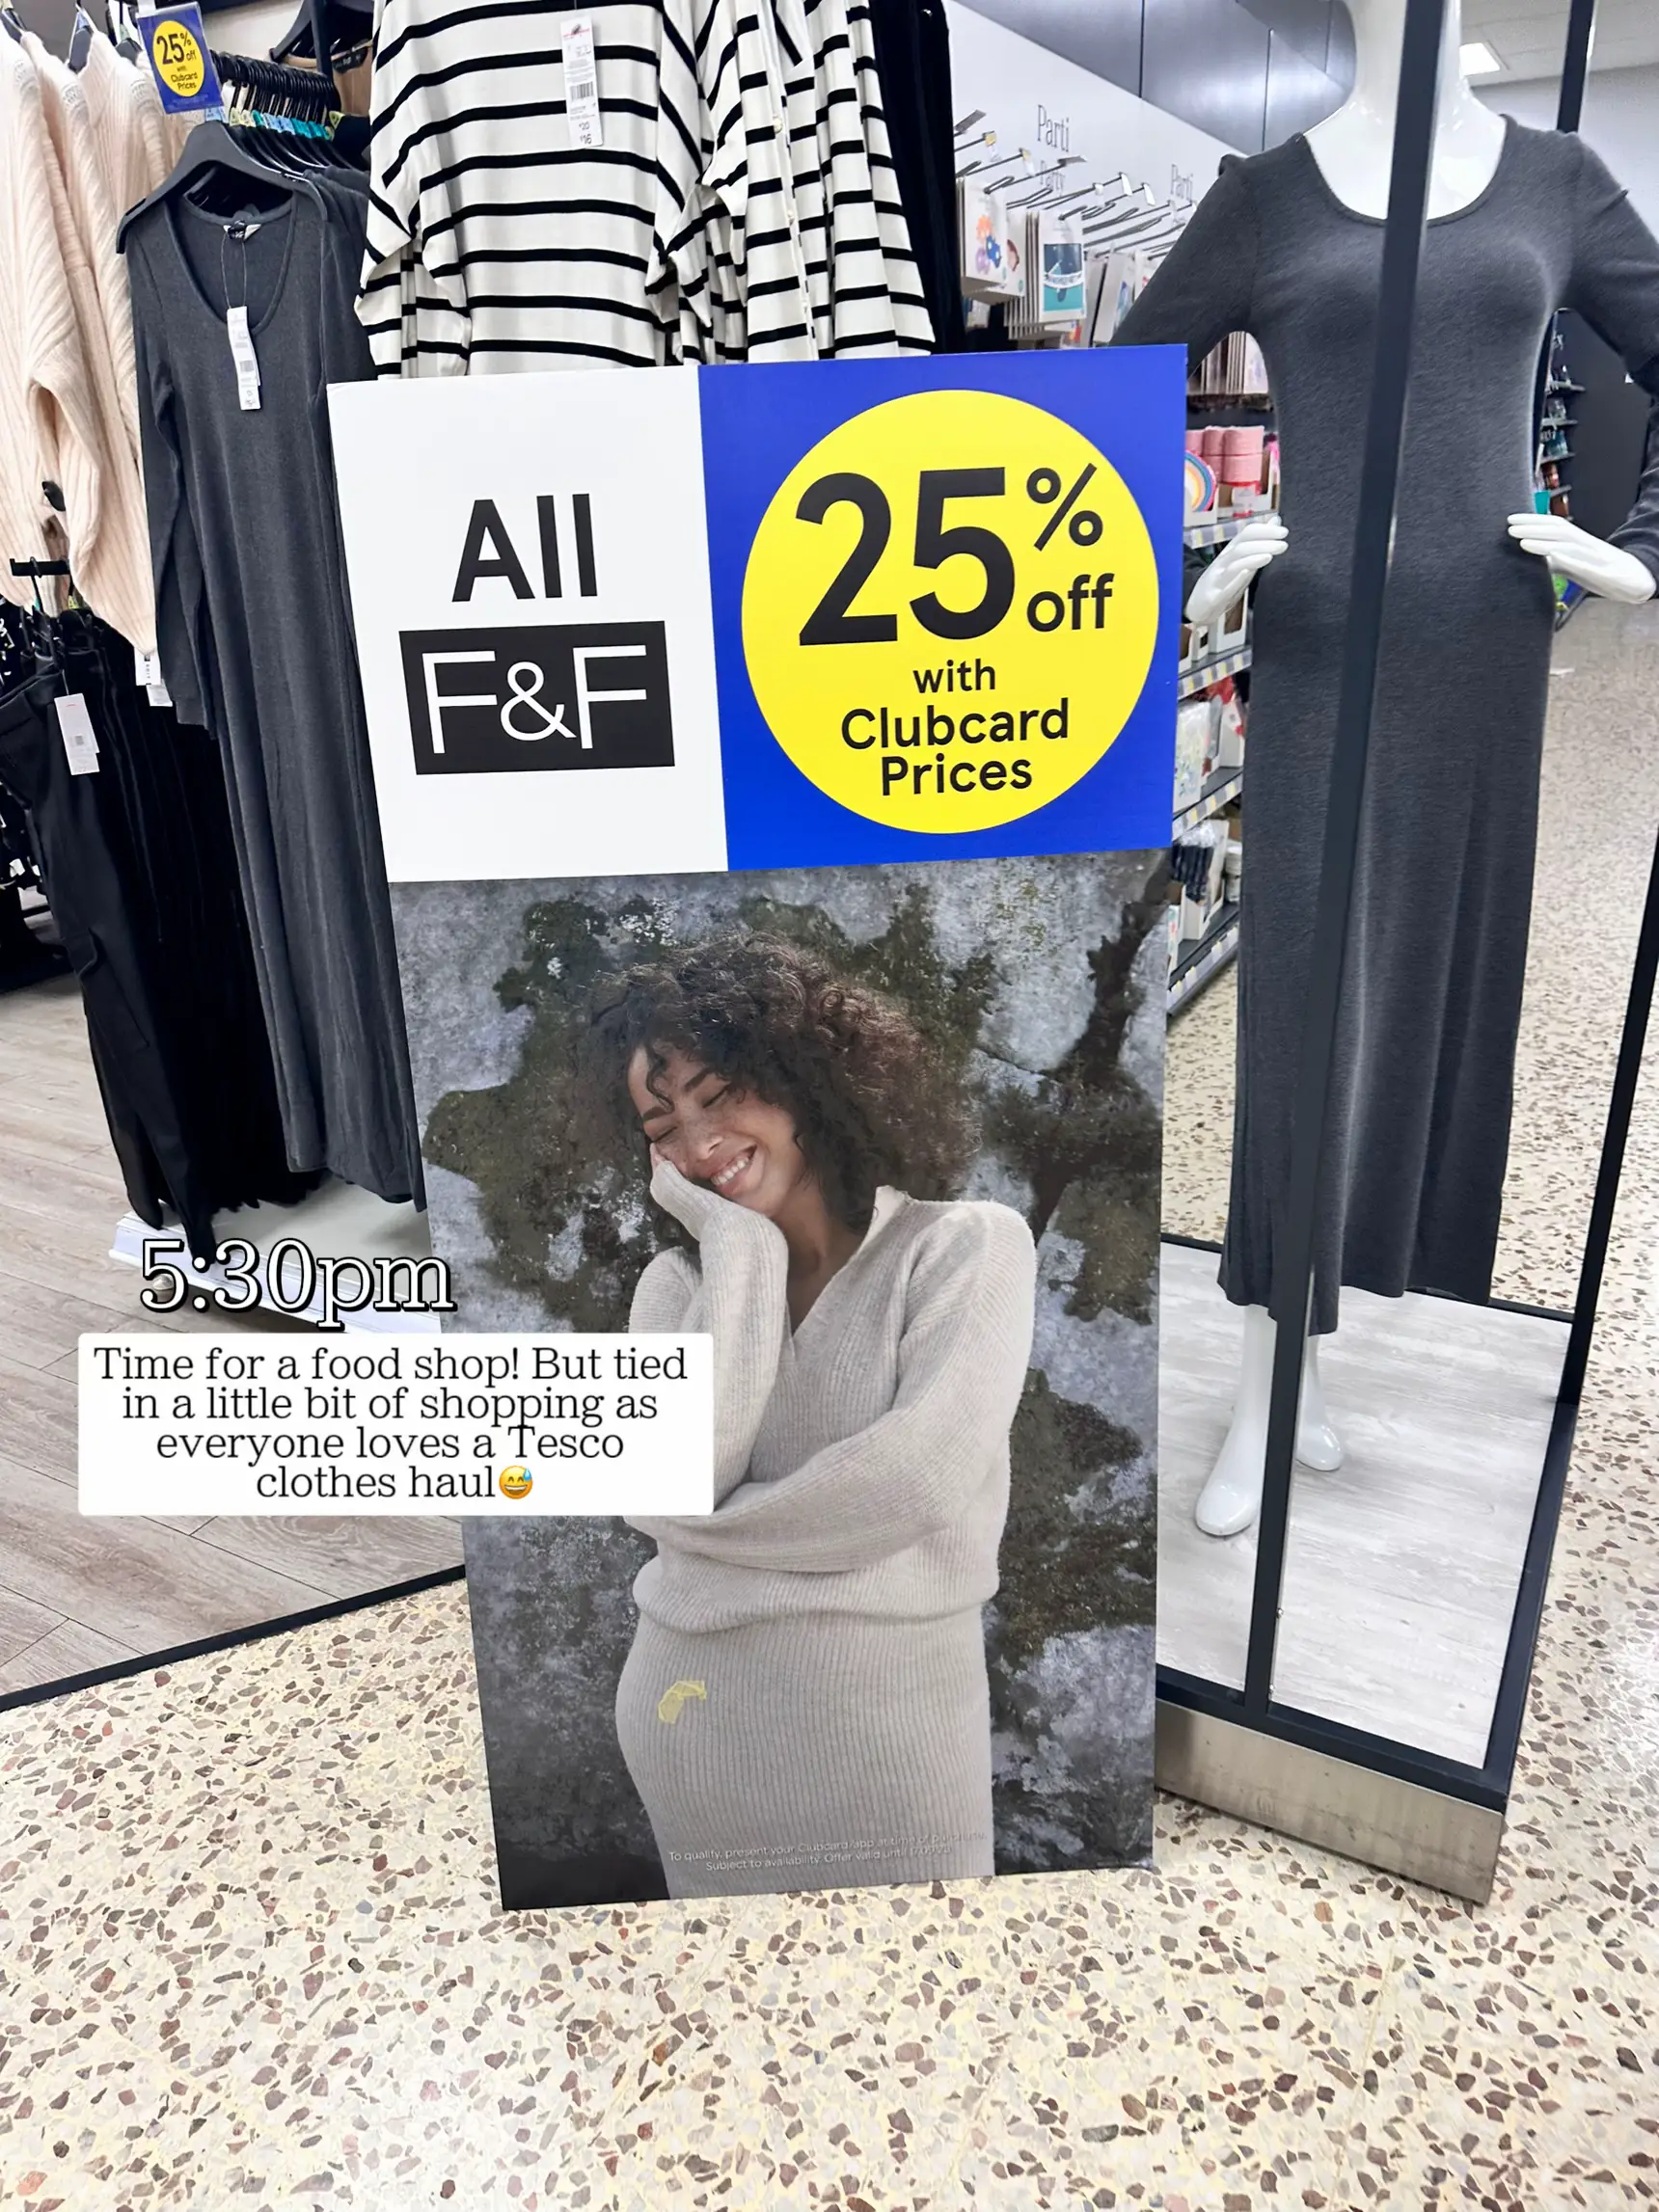 Tesco sends message to anybody who buys F&F clothing and says 'we